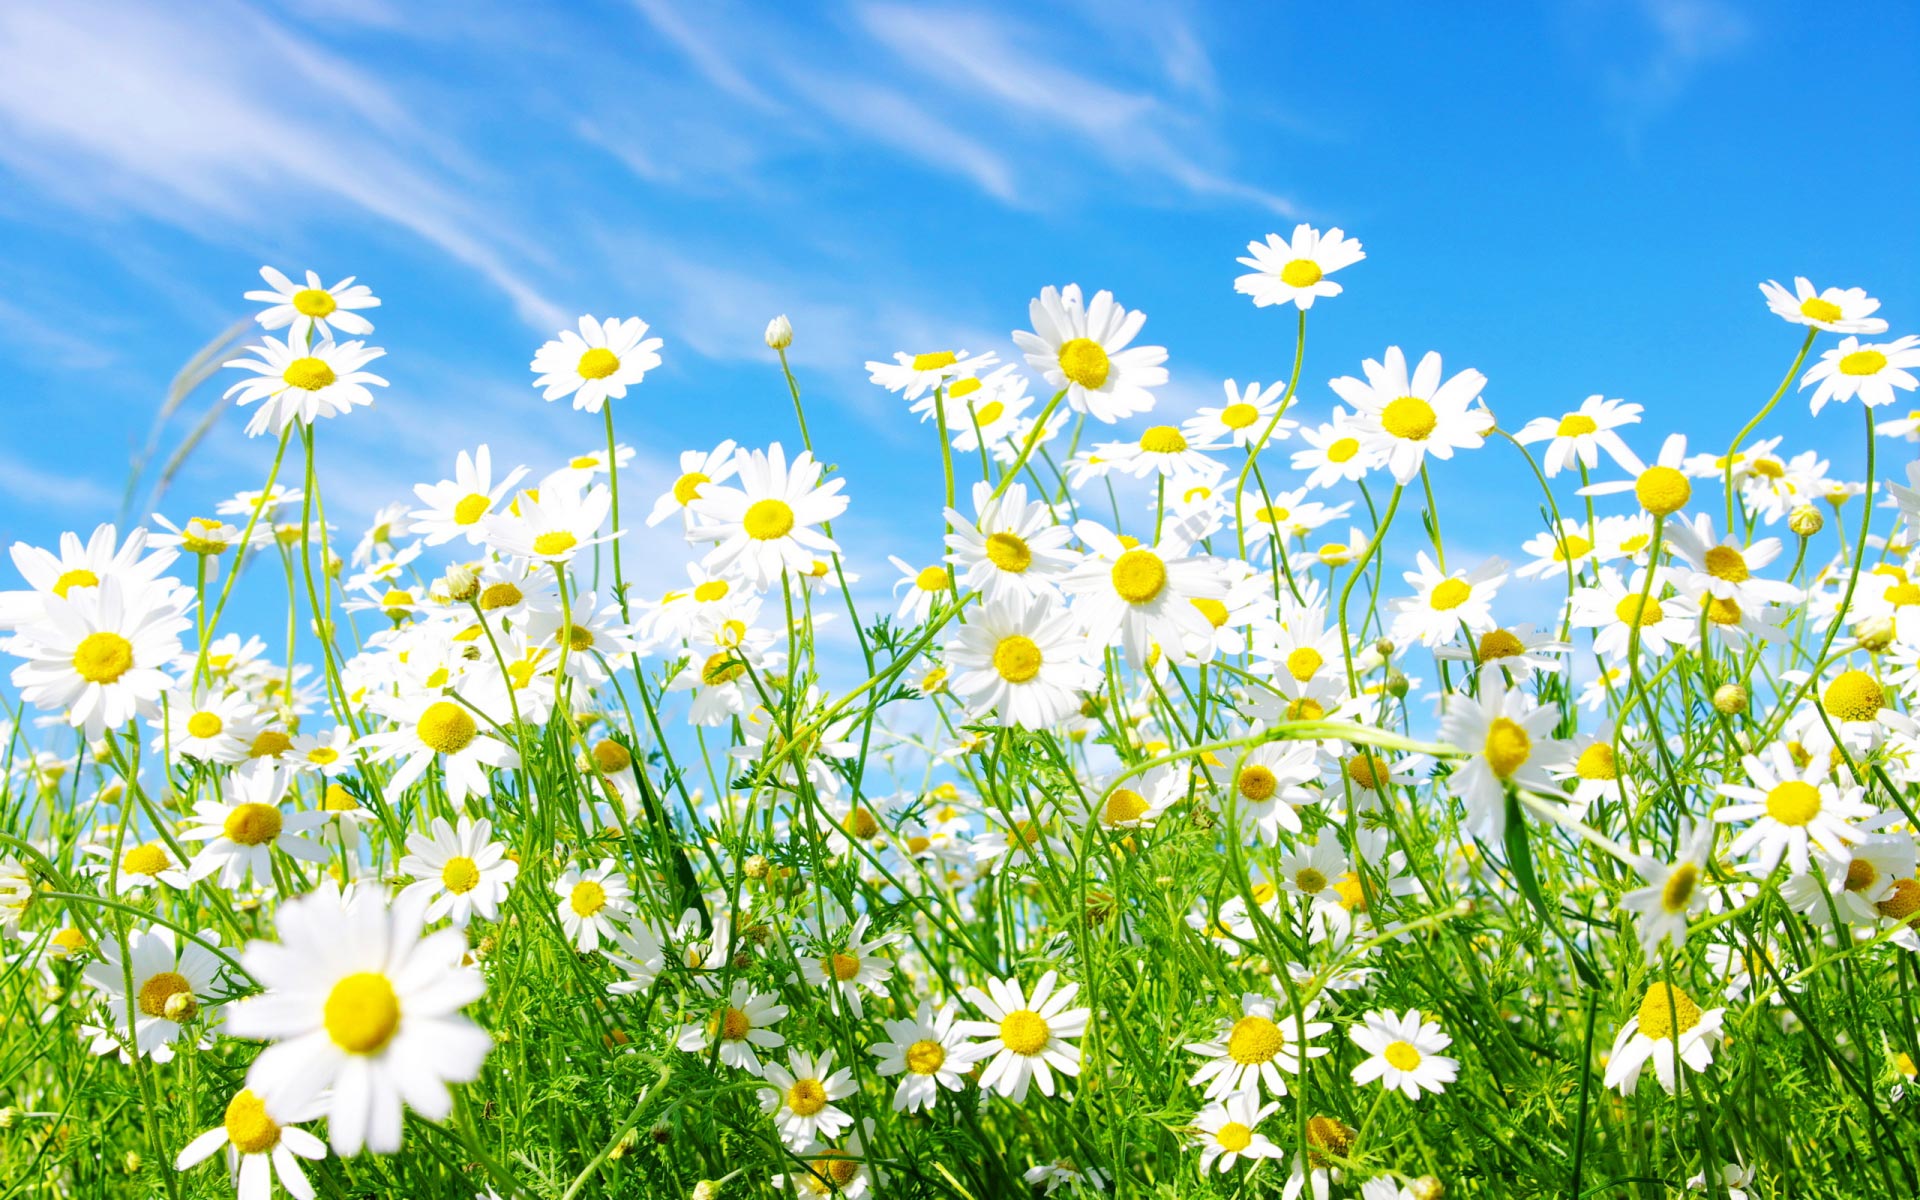 download free desktop backgrounds for spring which is under the spring